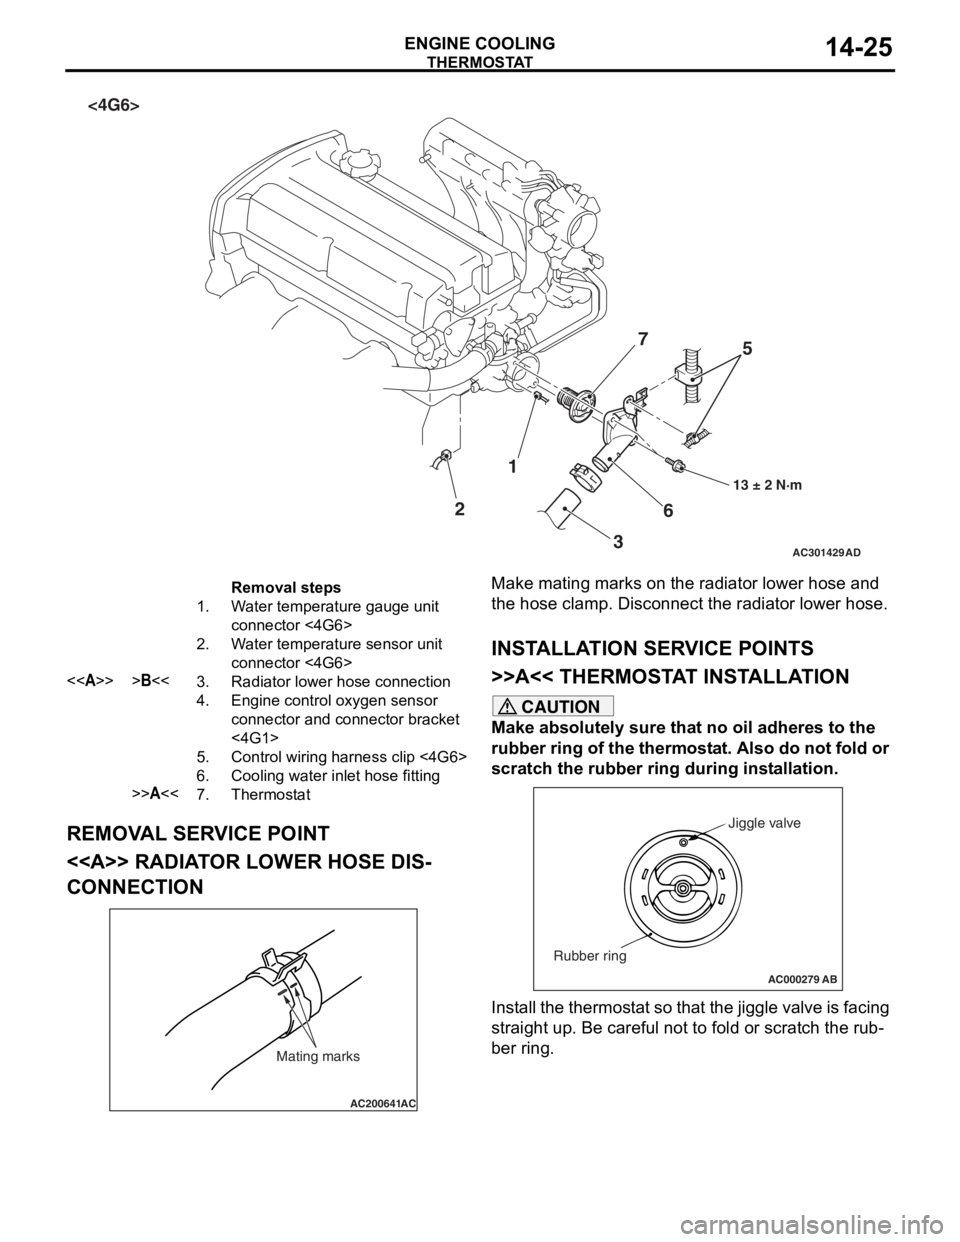 MITSUBISHI LANCER IX 2006  Service Manual 
AC301429
1
2 36
7
13 ± 2 N·m
AD
5
<4G6>
Removal steps 
1.Water temperature gauge unit 
connector <4G6>
2.Water temperature sensor unit 
connector <4G6>
<<A>>>B<<3.Radiator lower hose connection
4.E